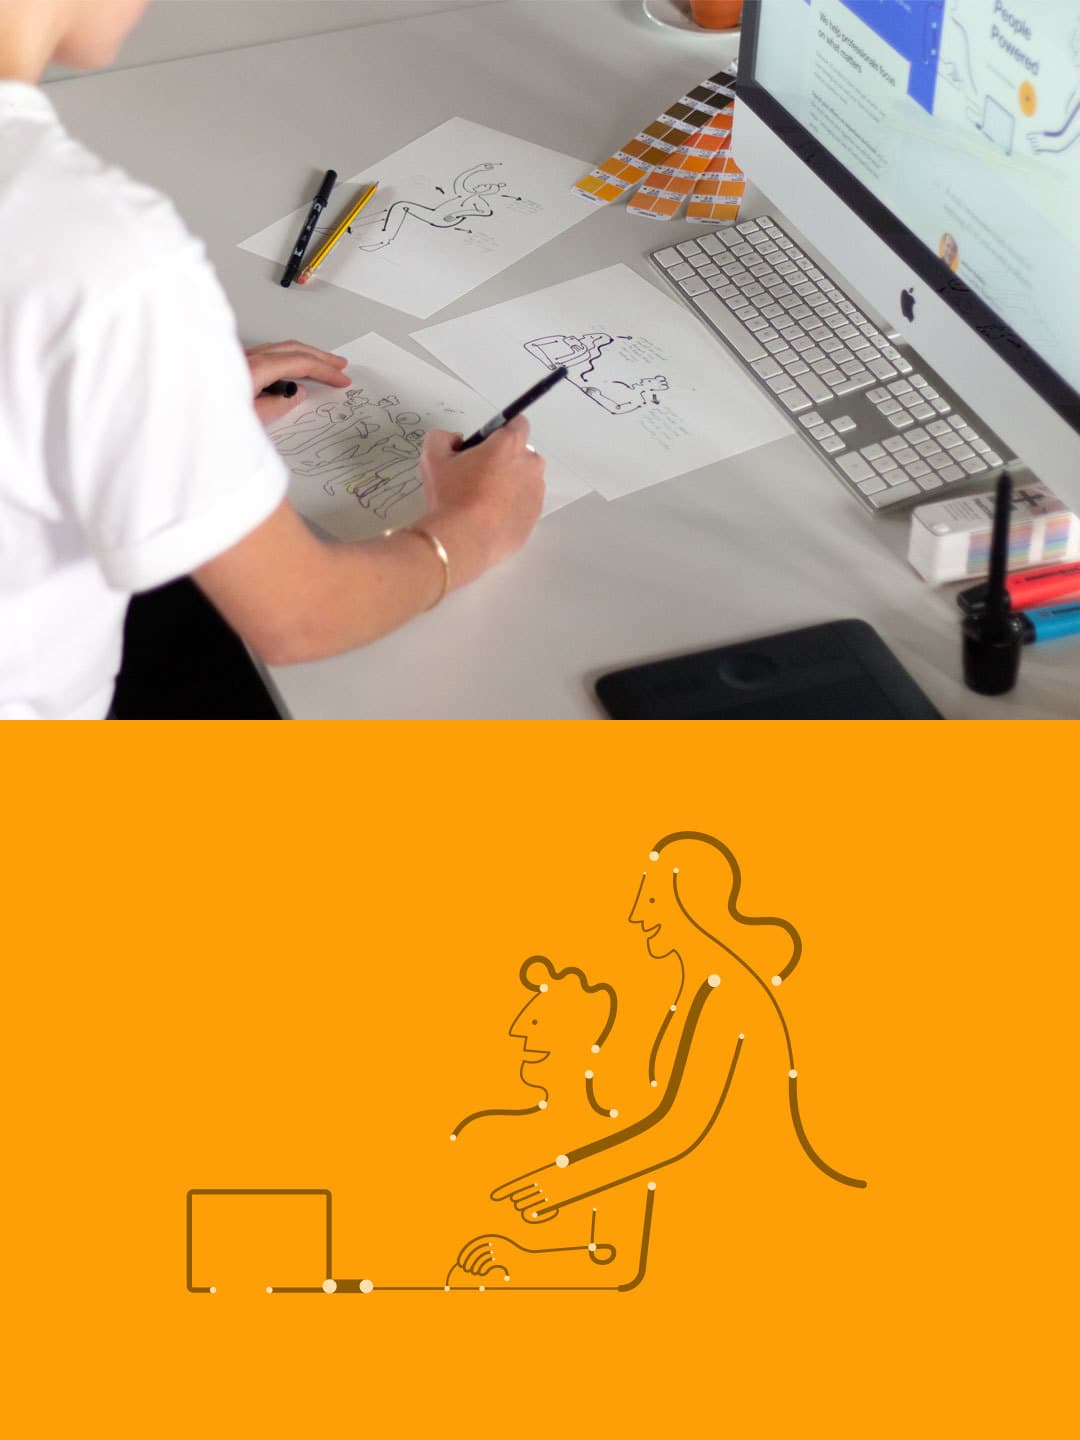 We added a human element through illustration and animation